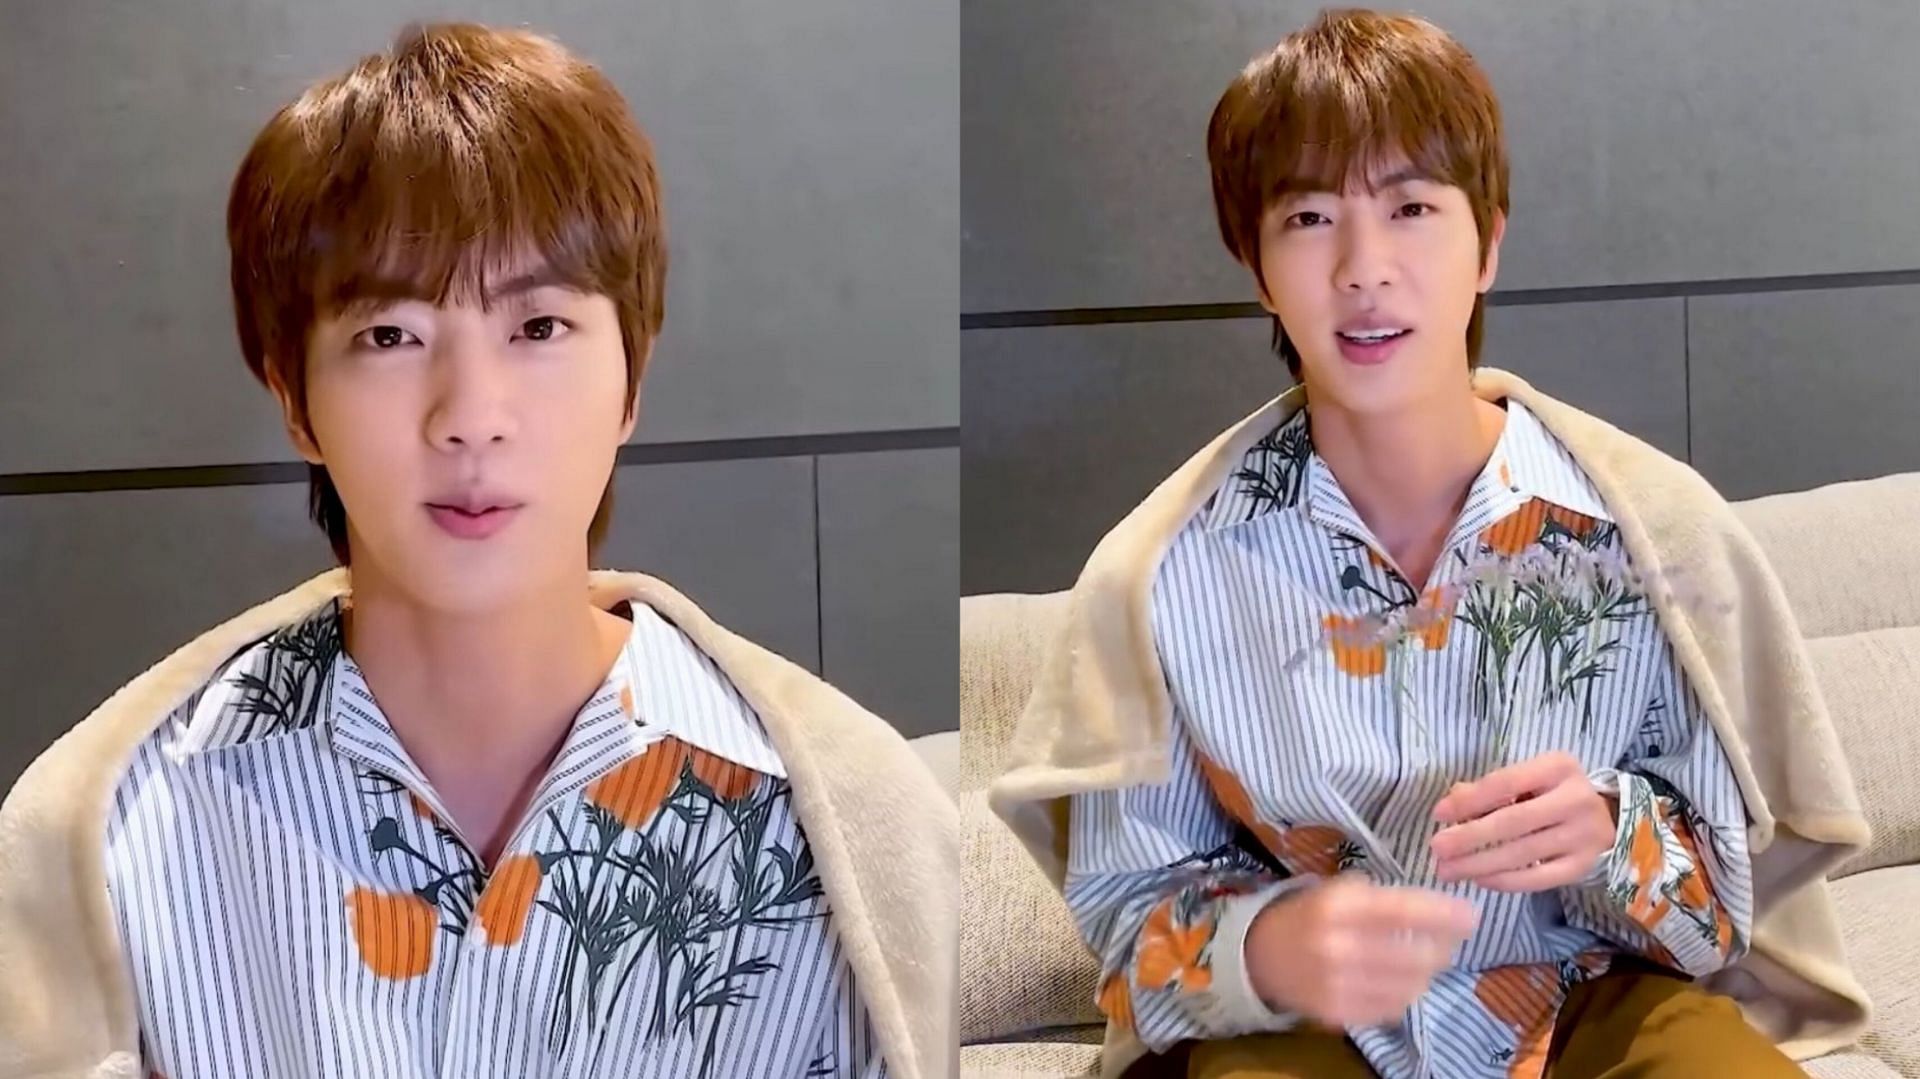 BANGTAN TV drops a video message from BTS Jin for ARMYs on YouTube Channel (Image via BANGTANTV YOUTUBE)